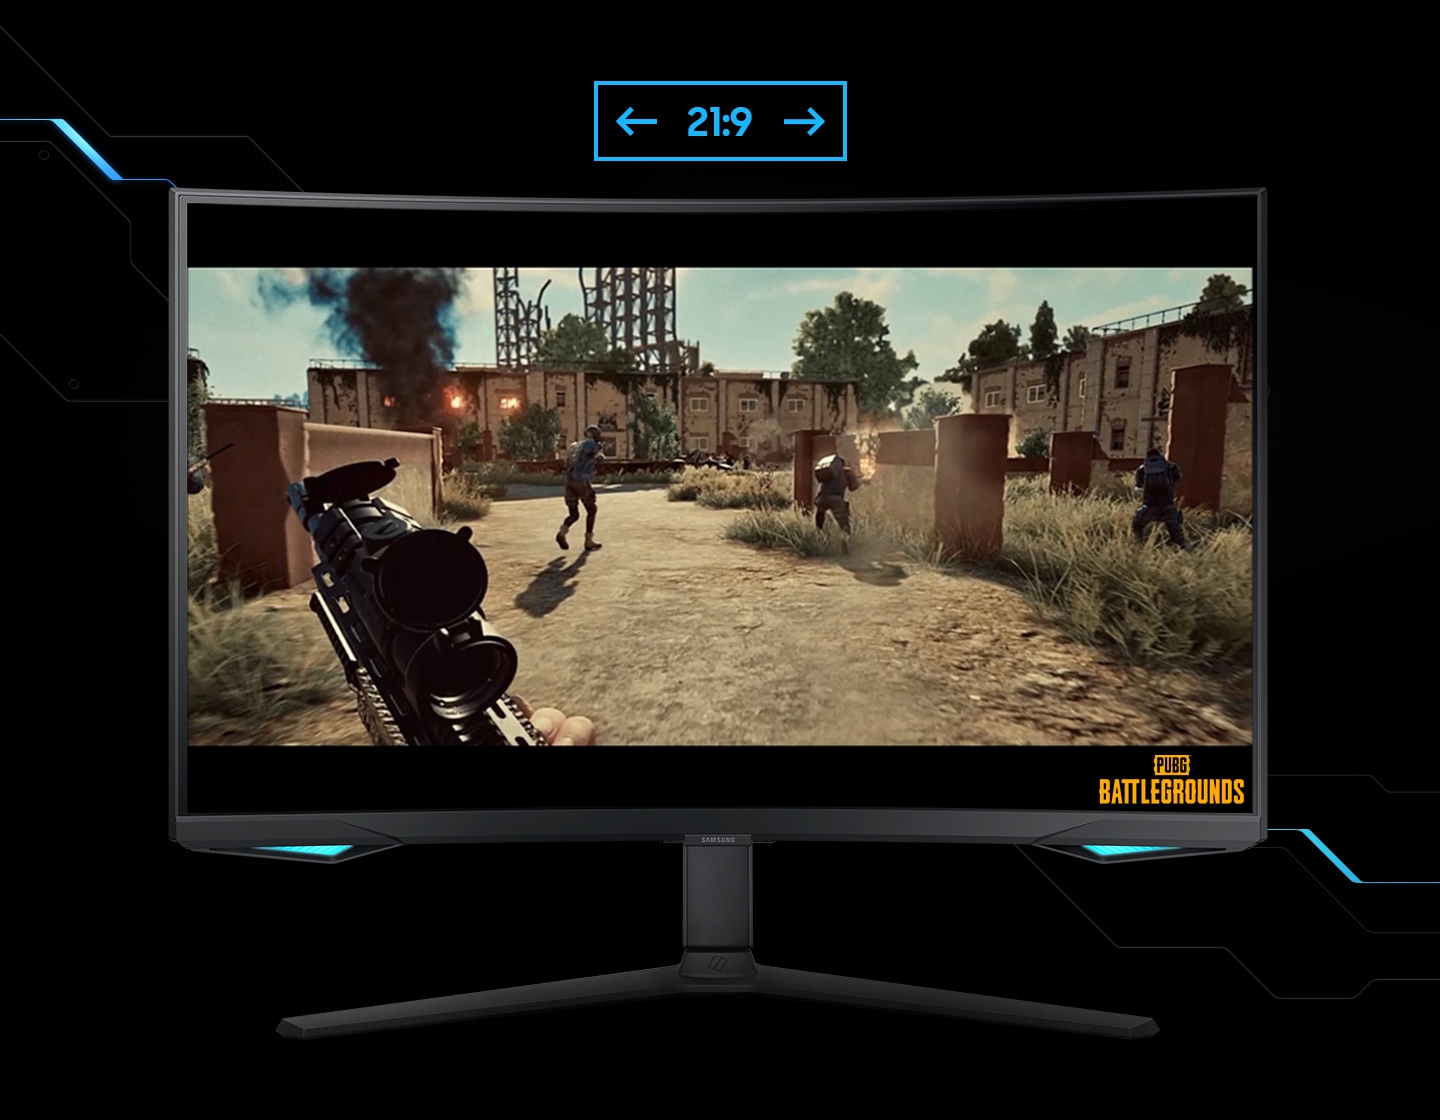 A monitor shows the viewpoint of a player within a shooting game. The player is running around a battle zone, with a machine gun. As the screen is extended from 16:9 to 21:9 proportion, an unseen enemy reveals in the left corner. "Battleground" logo is shown on the right lower corner of the screen.